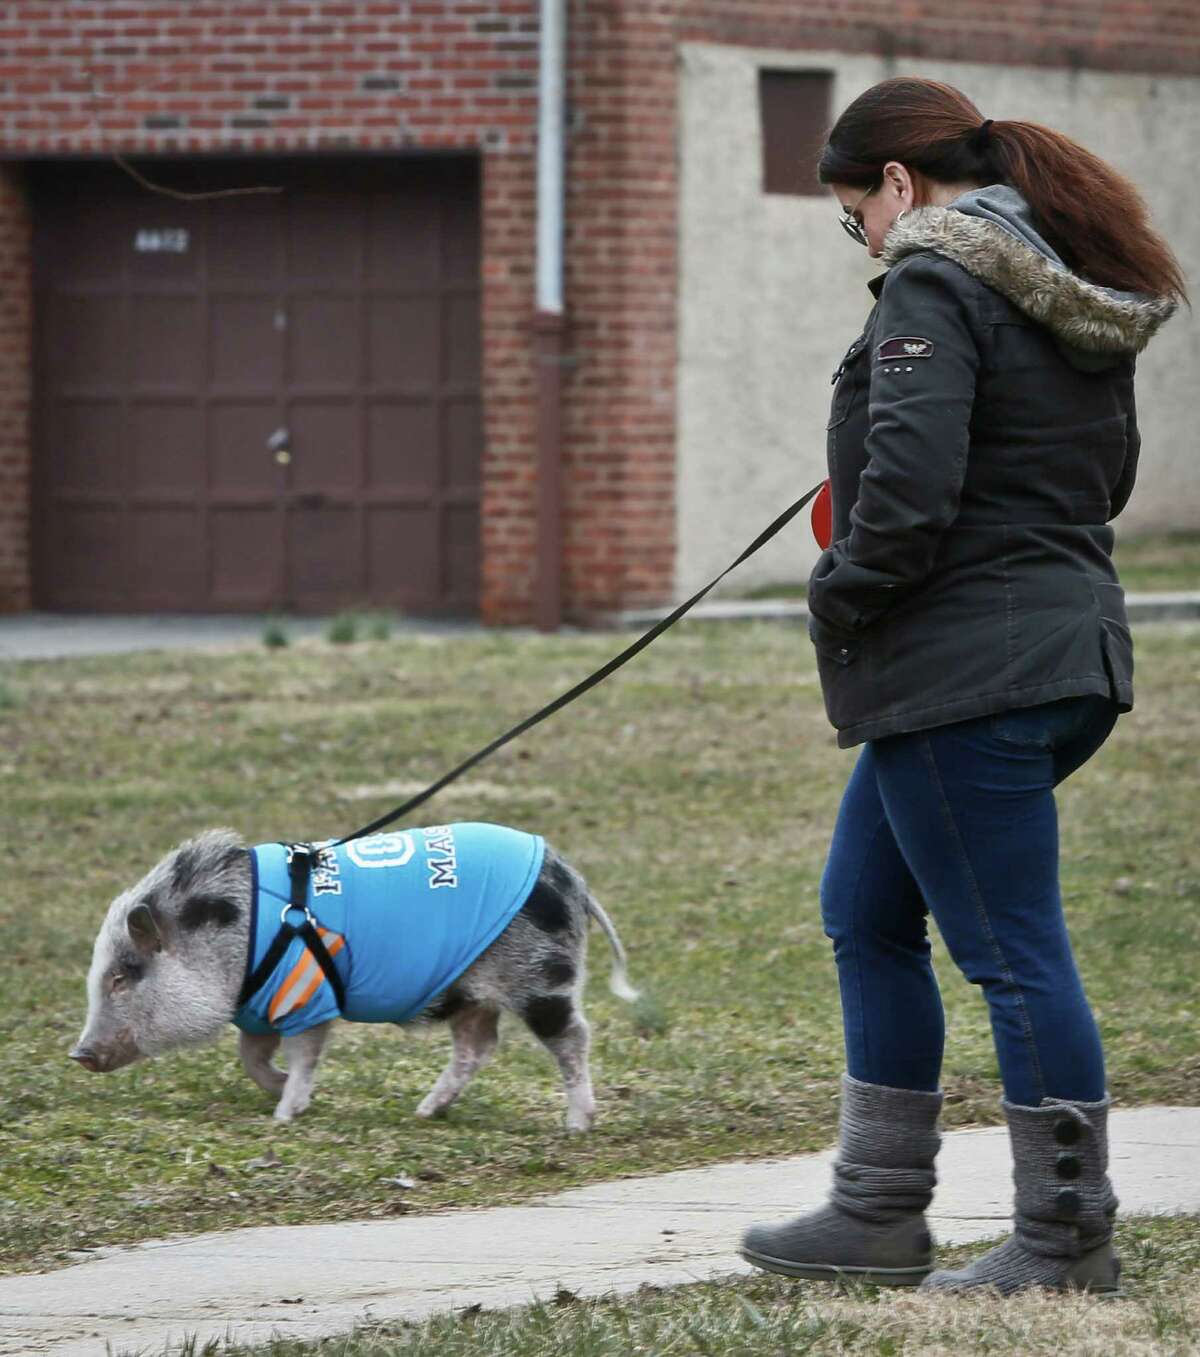 Danielle Forgione walks Petey, the family's pet pig, on Thursday, March 21, 2013, in the Queens borough of New York. Forgione is scrambling to sell her second-floor apartment after a neighbor complained about 1-year-old Petey the pig to the co-op board. In November and December she was issued city animal violations and in January was told by both the city and her management office that she needed to get rid of the pig.